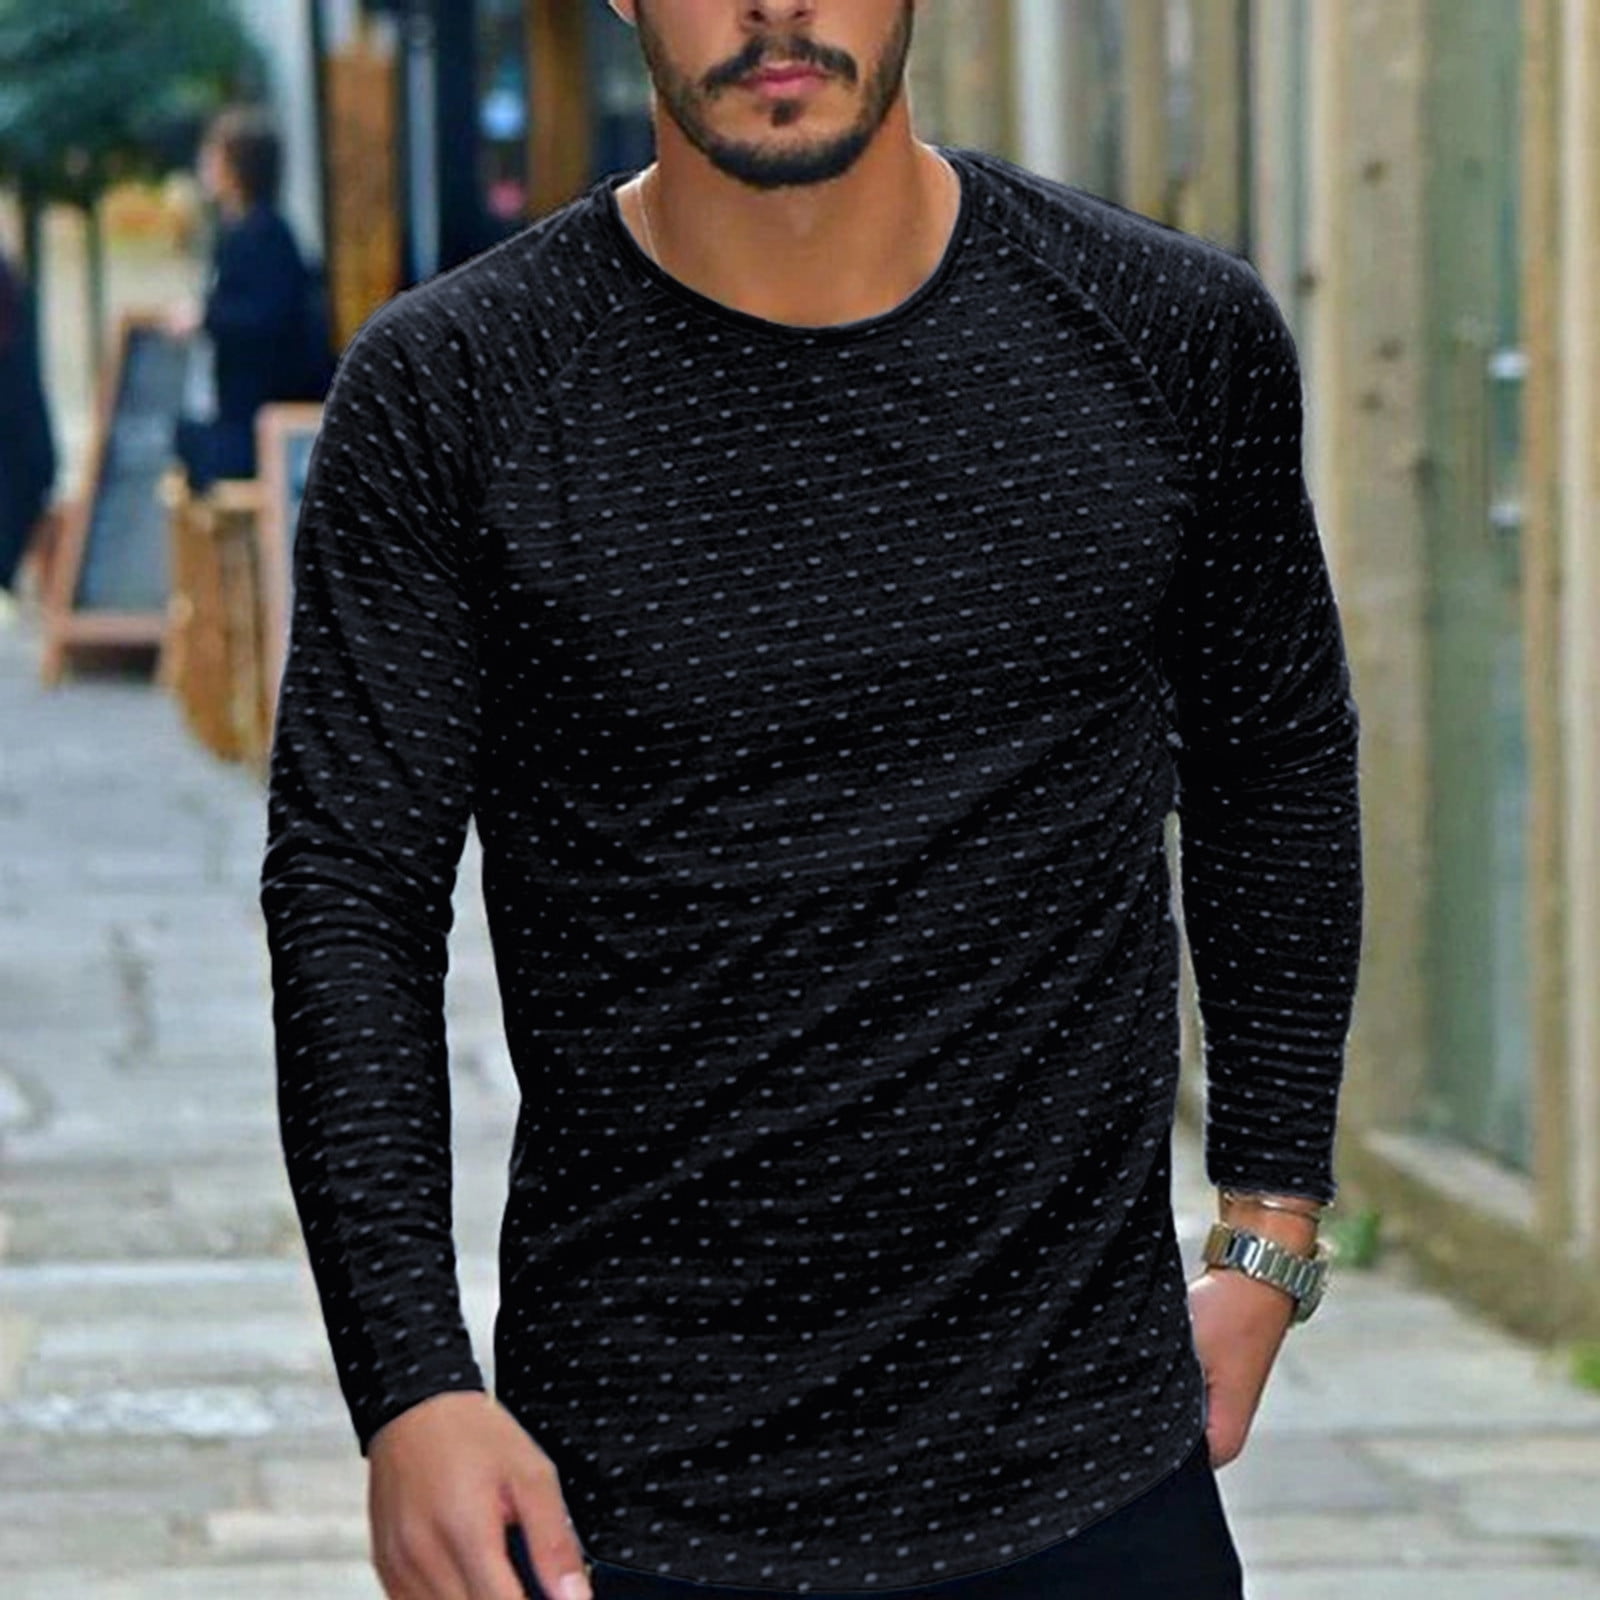 Men's Casual Crew Neck T-Shirts Slim Long Sleeves Basic Blouses Tee Tops Clothes 